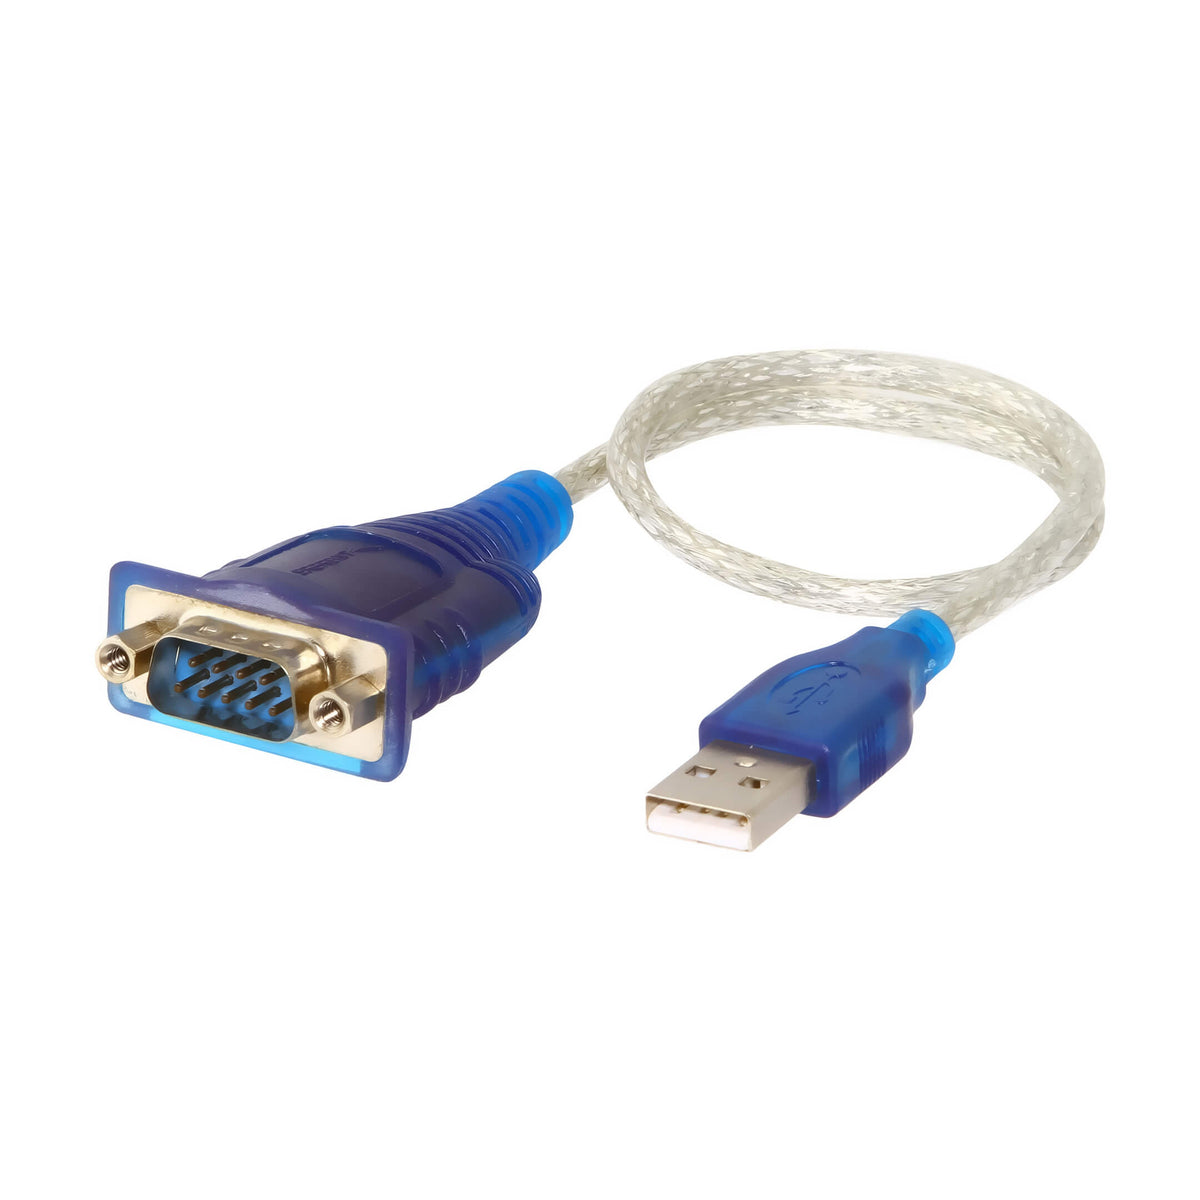 USB 2.0 To Serial DB9 Male (9 Pin) RS232 Cable Adapter 1 ft Cable